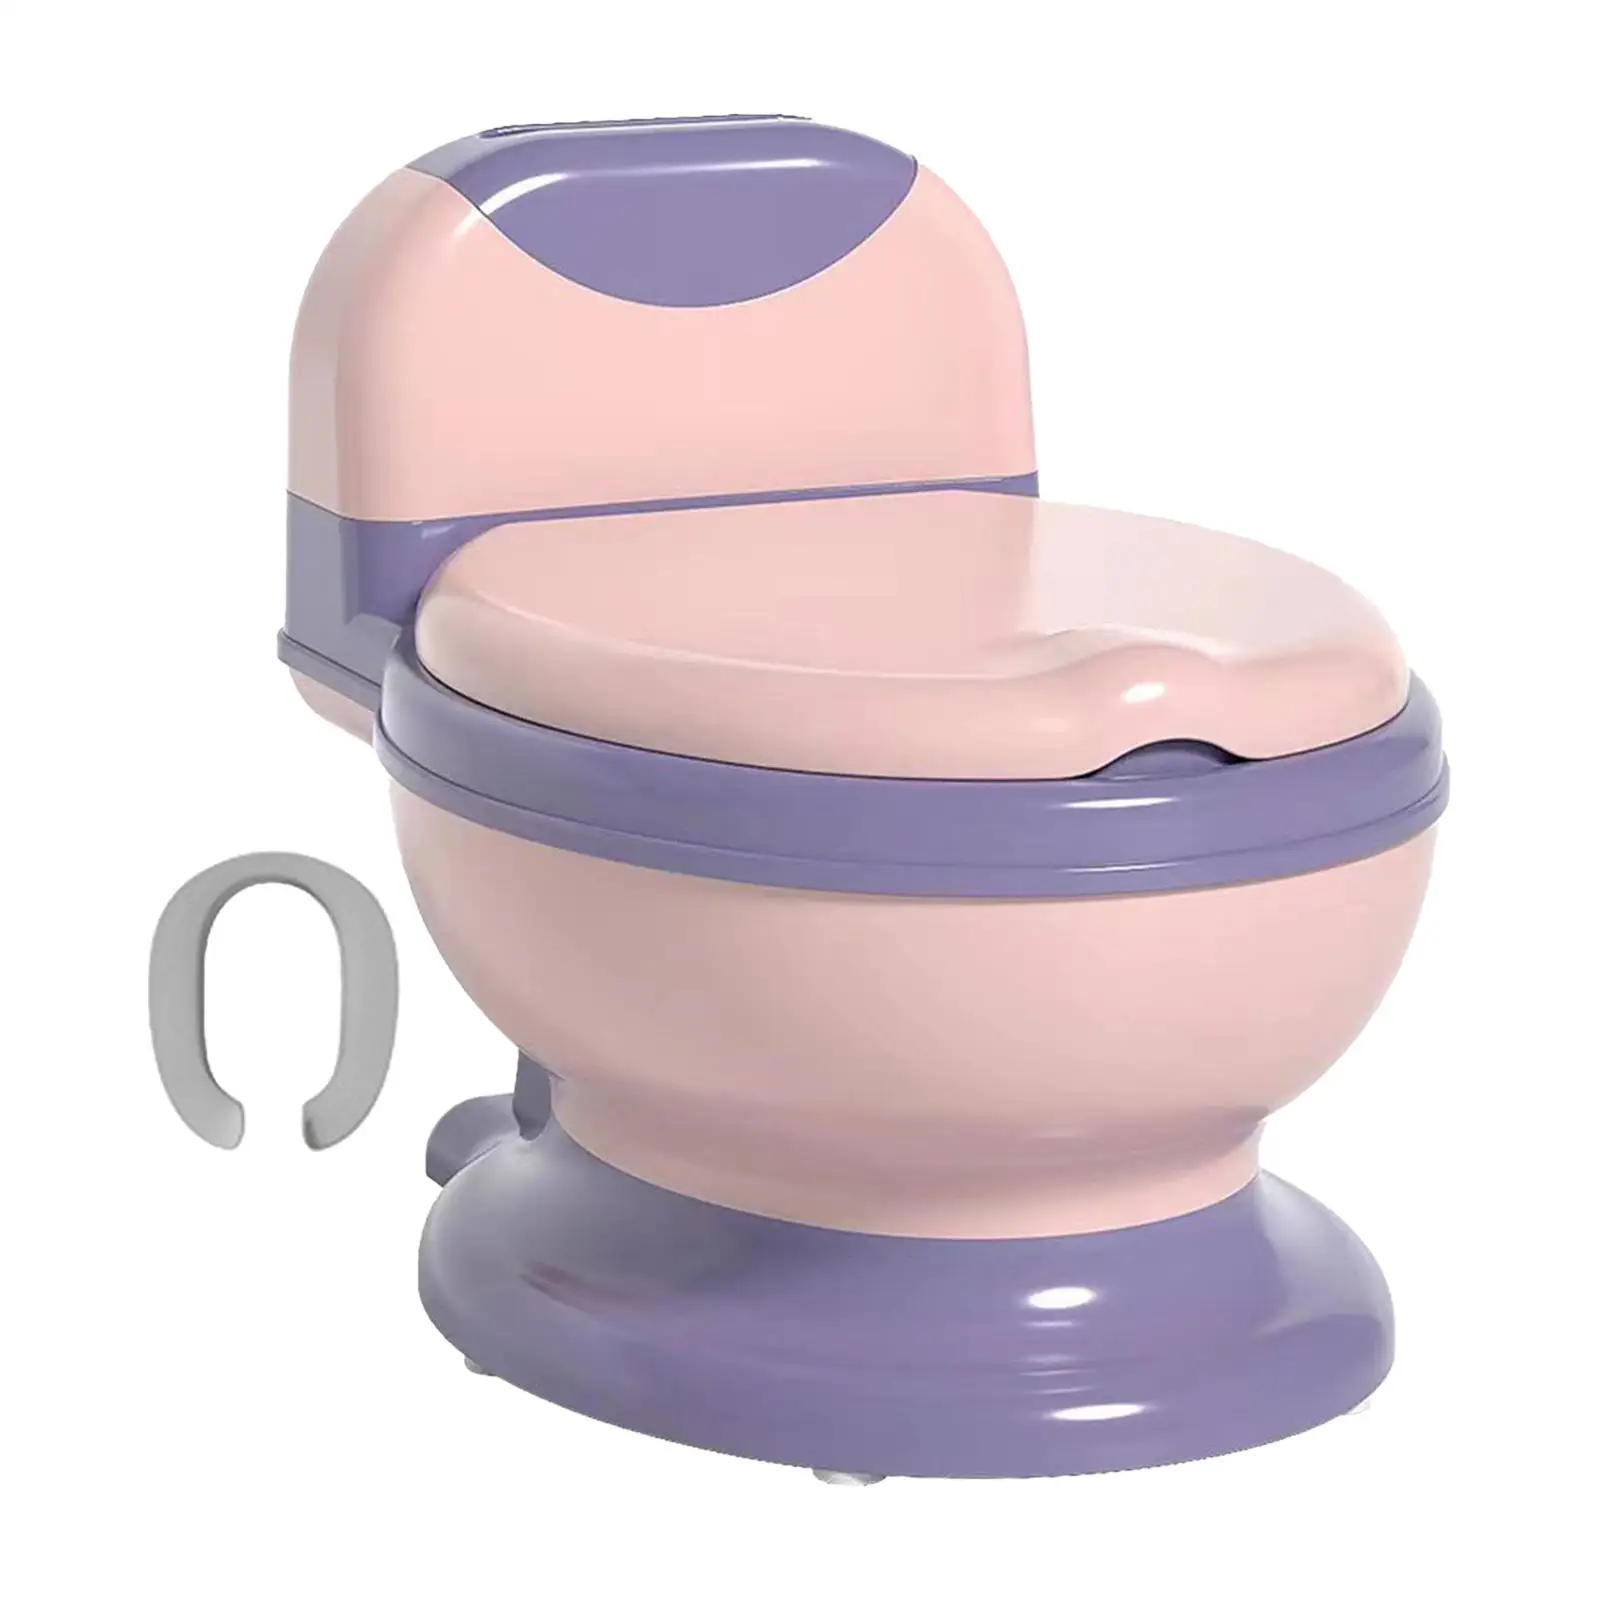 Potty Train Toilet Potty Train Seat Portable Real Feel Potty Toddlers Potty Chair for Baby Toddlers Kids Children Girls